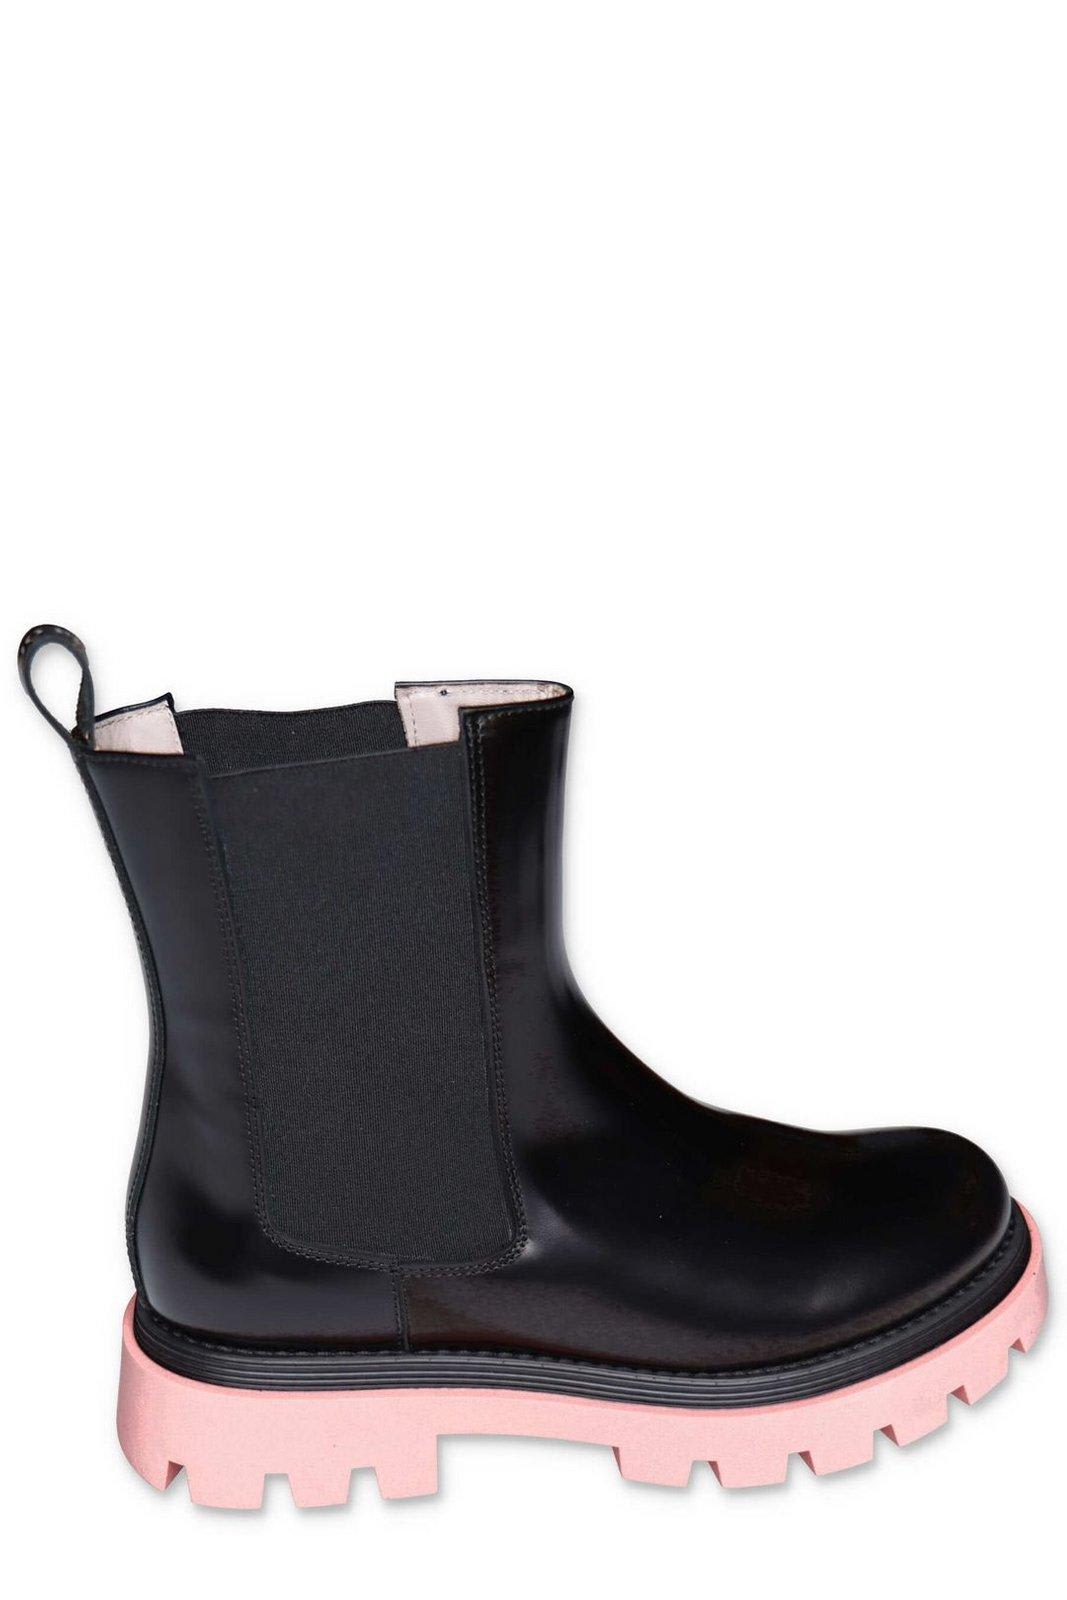 Emilio Pucci Round Toe Ankle Boots